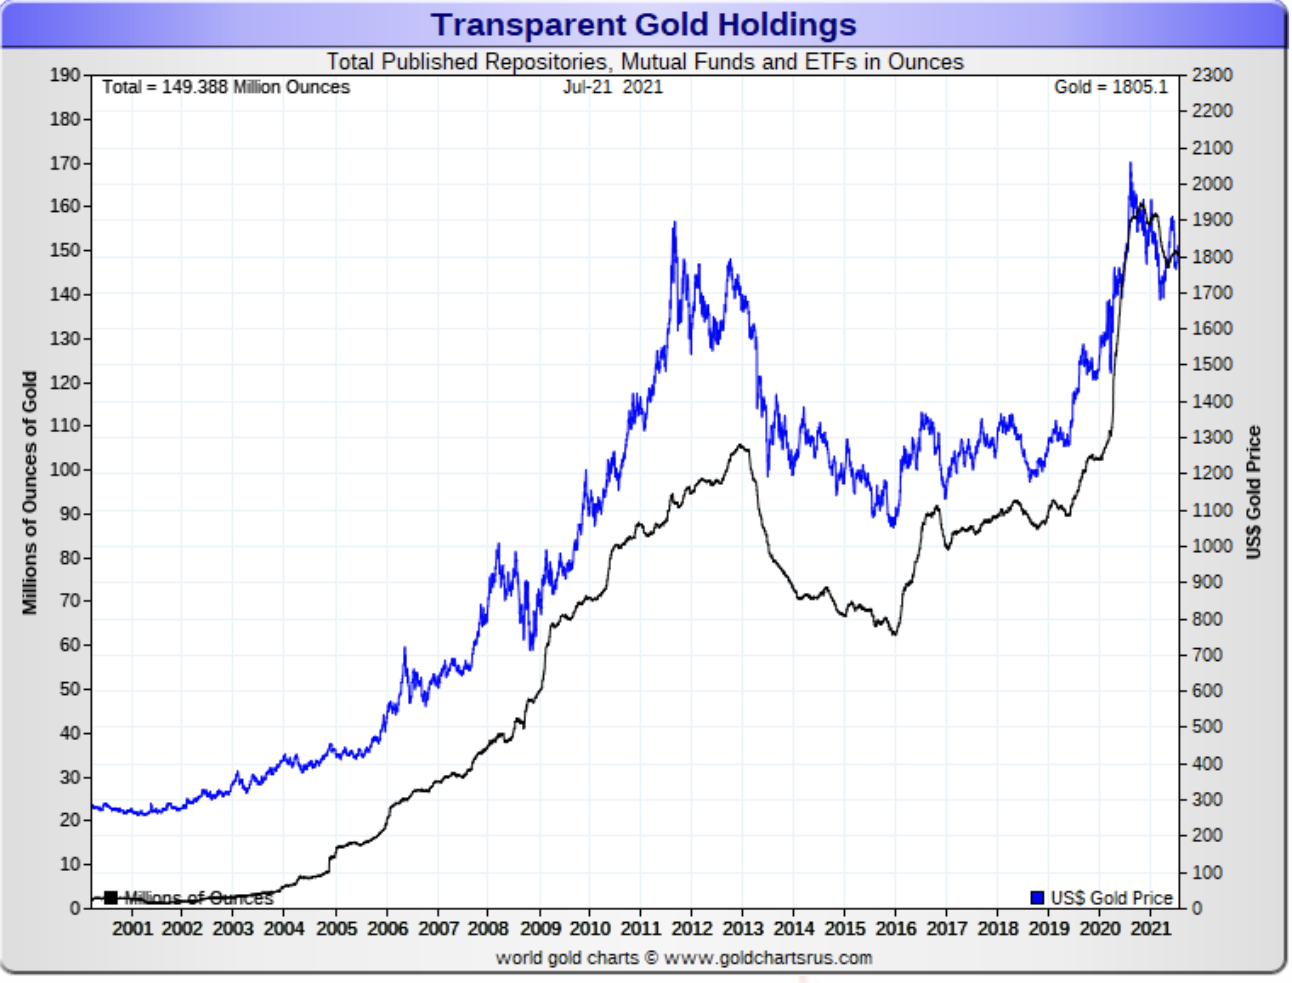 overlay line chart showing the close relationship between growth in ETF gold stockpiles and the price of gold